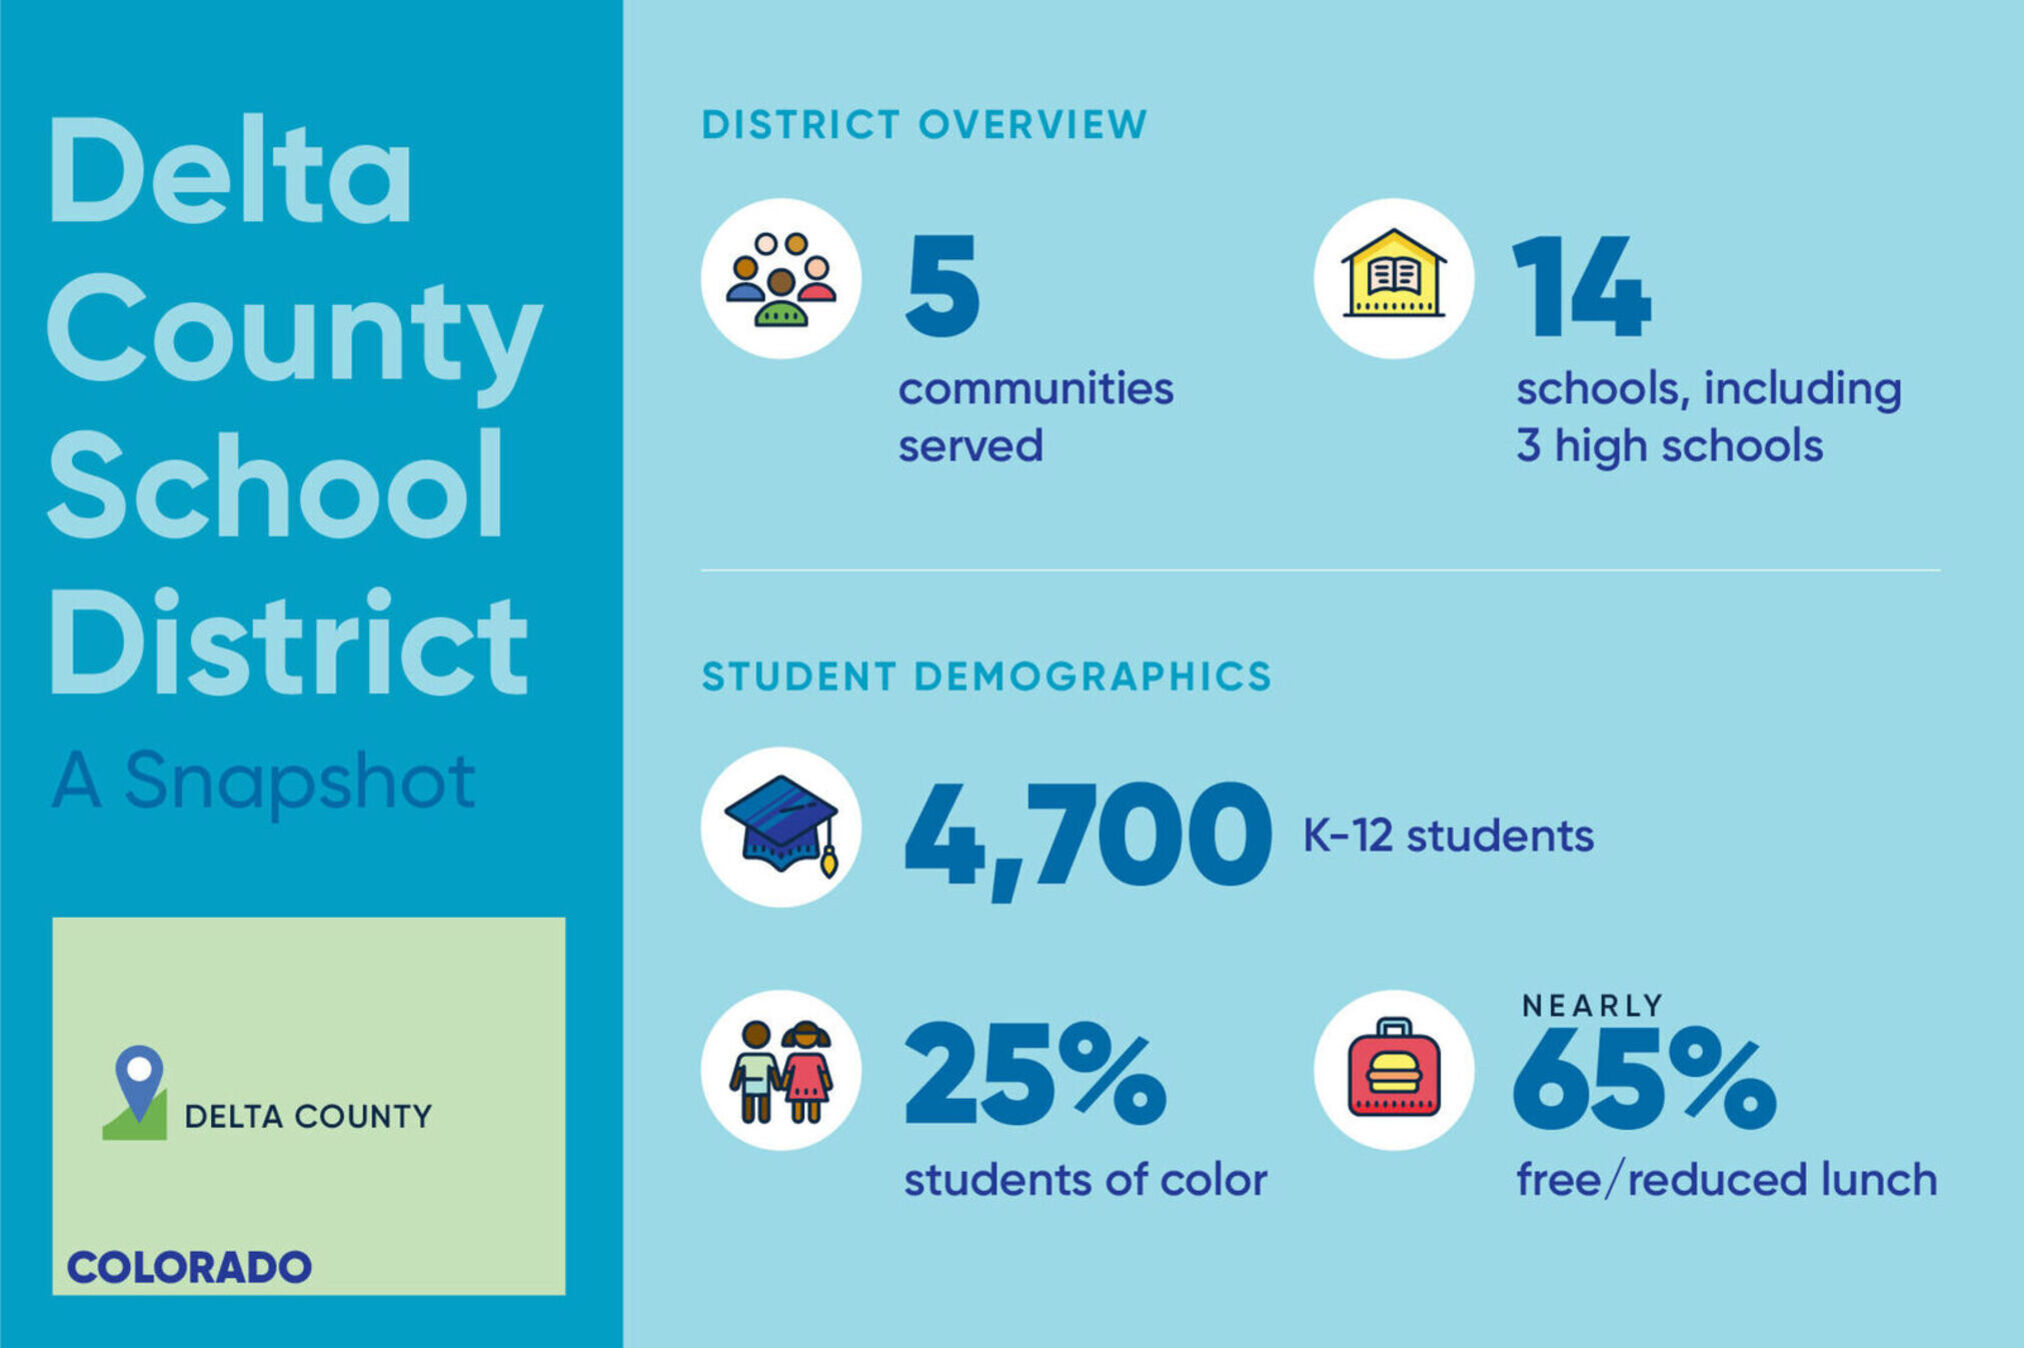 Infographic of the district that reads: 5 communities served, 14 schools including 3 high schools, 4700 K-12 students, 25% students of color, and nearly 65% in free/reduced lunch